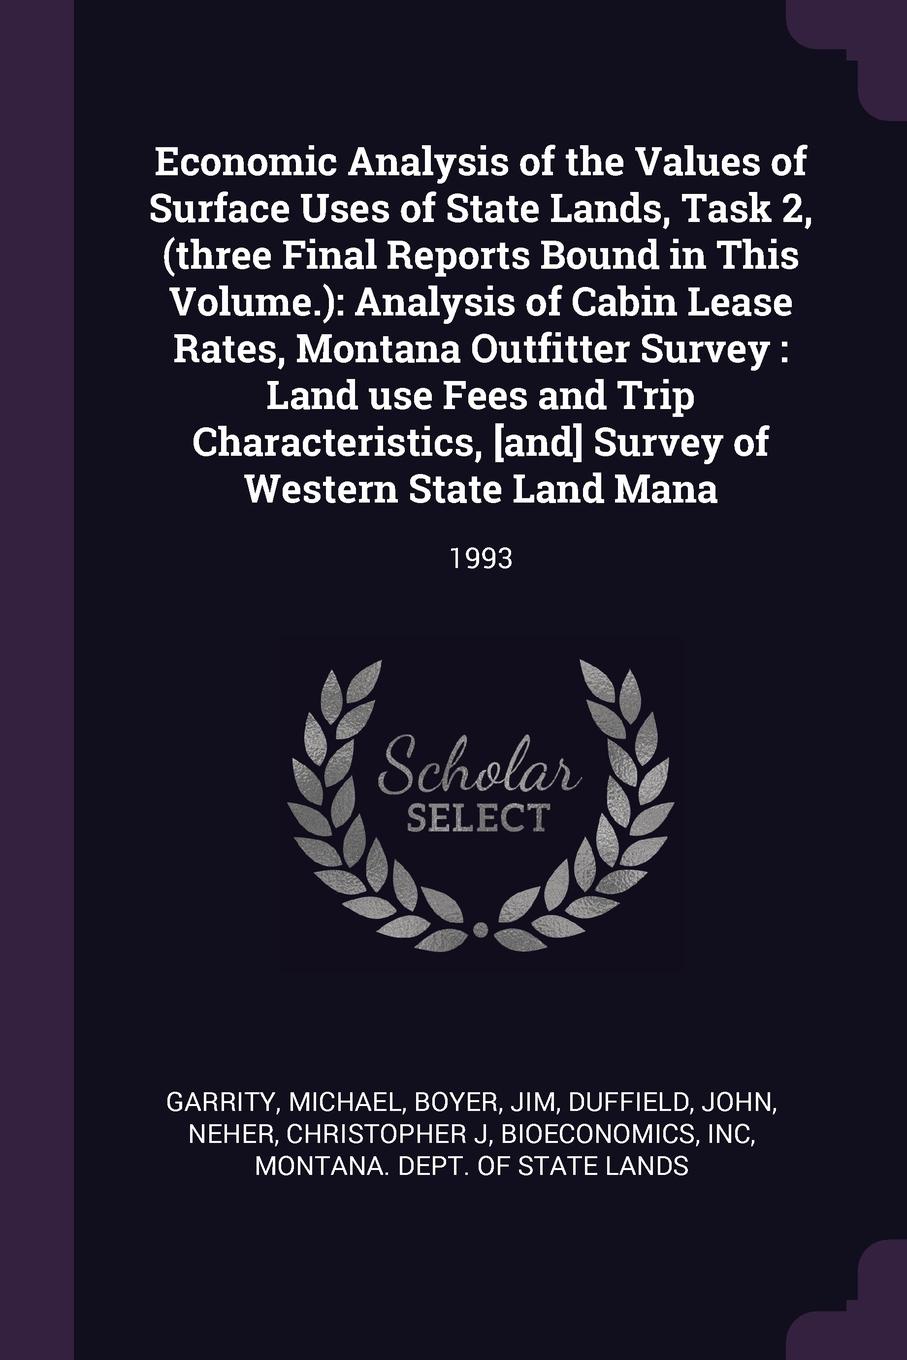 Economic Analysis of the Values of Surface Uses of State Lands, Task 2, (three Final Reports Bound in This Volume.). Analysis of Cabin Lease Rates, Montana Outfitter Survey : Land use Fees and Trip Characteristics, .and. Survey of Western State La...